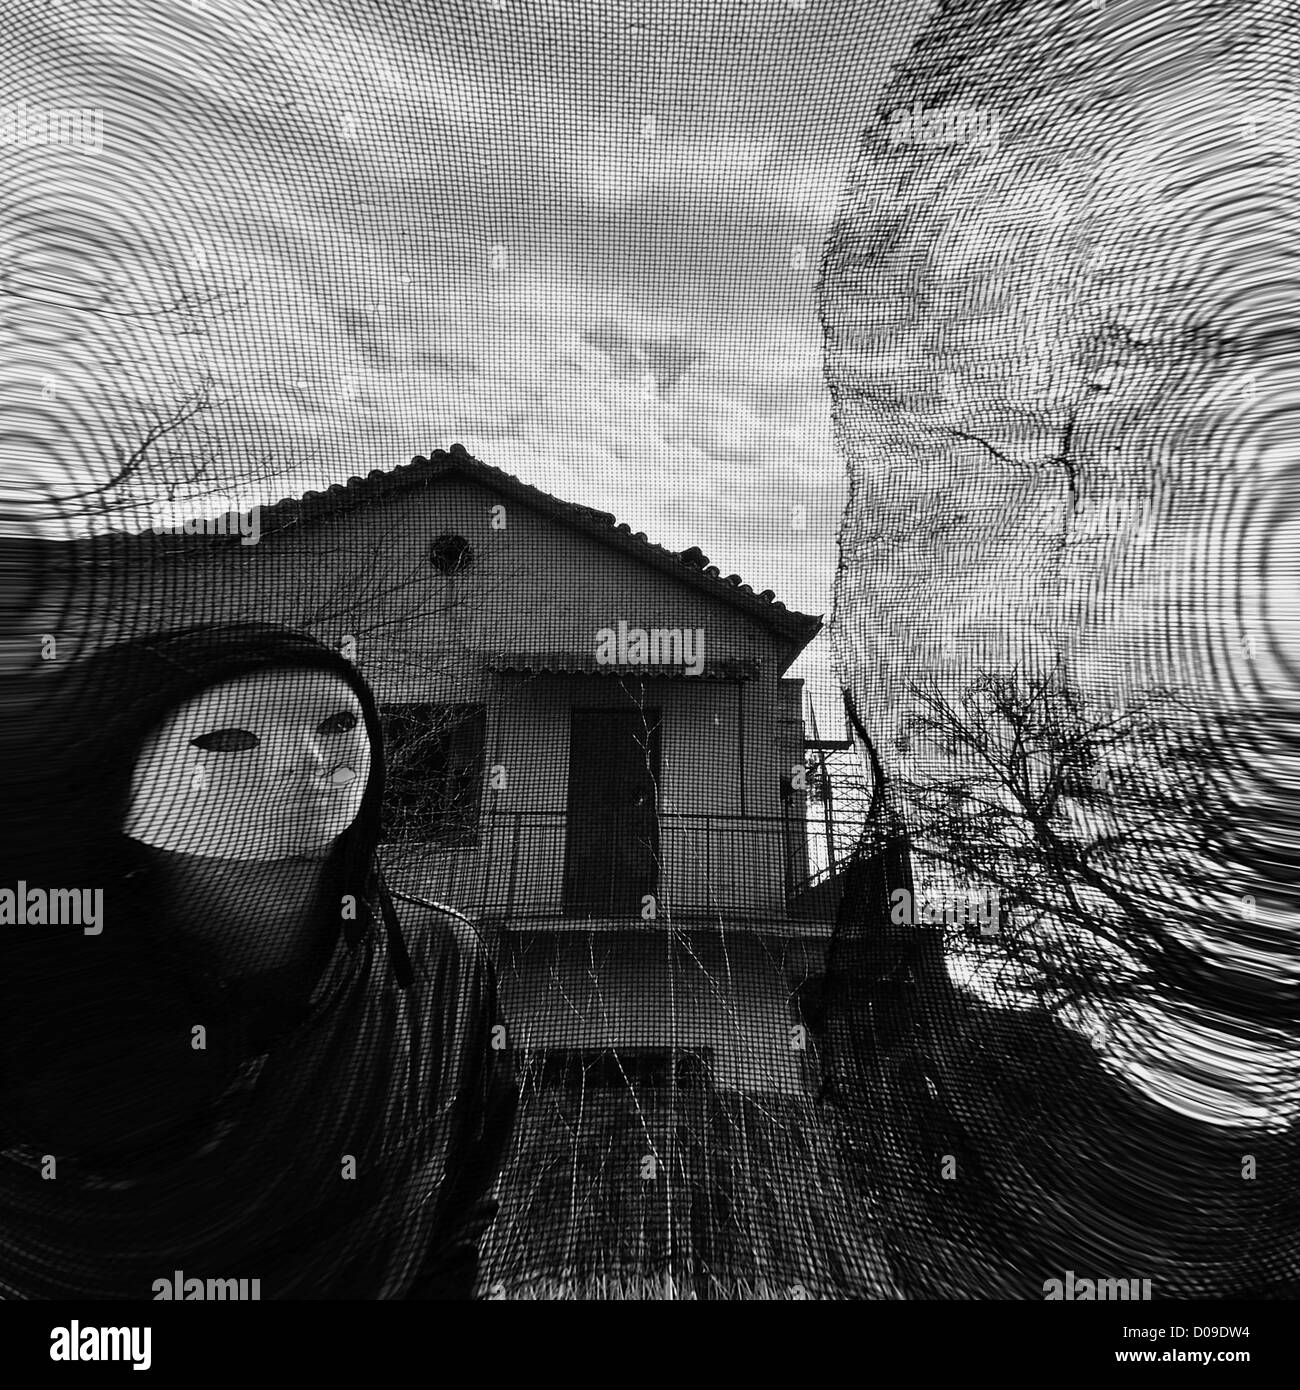 Masked figure behind threaded window. Black and white. Stock Photo